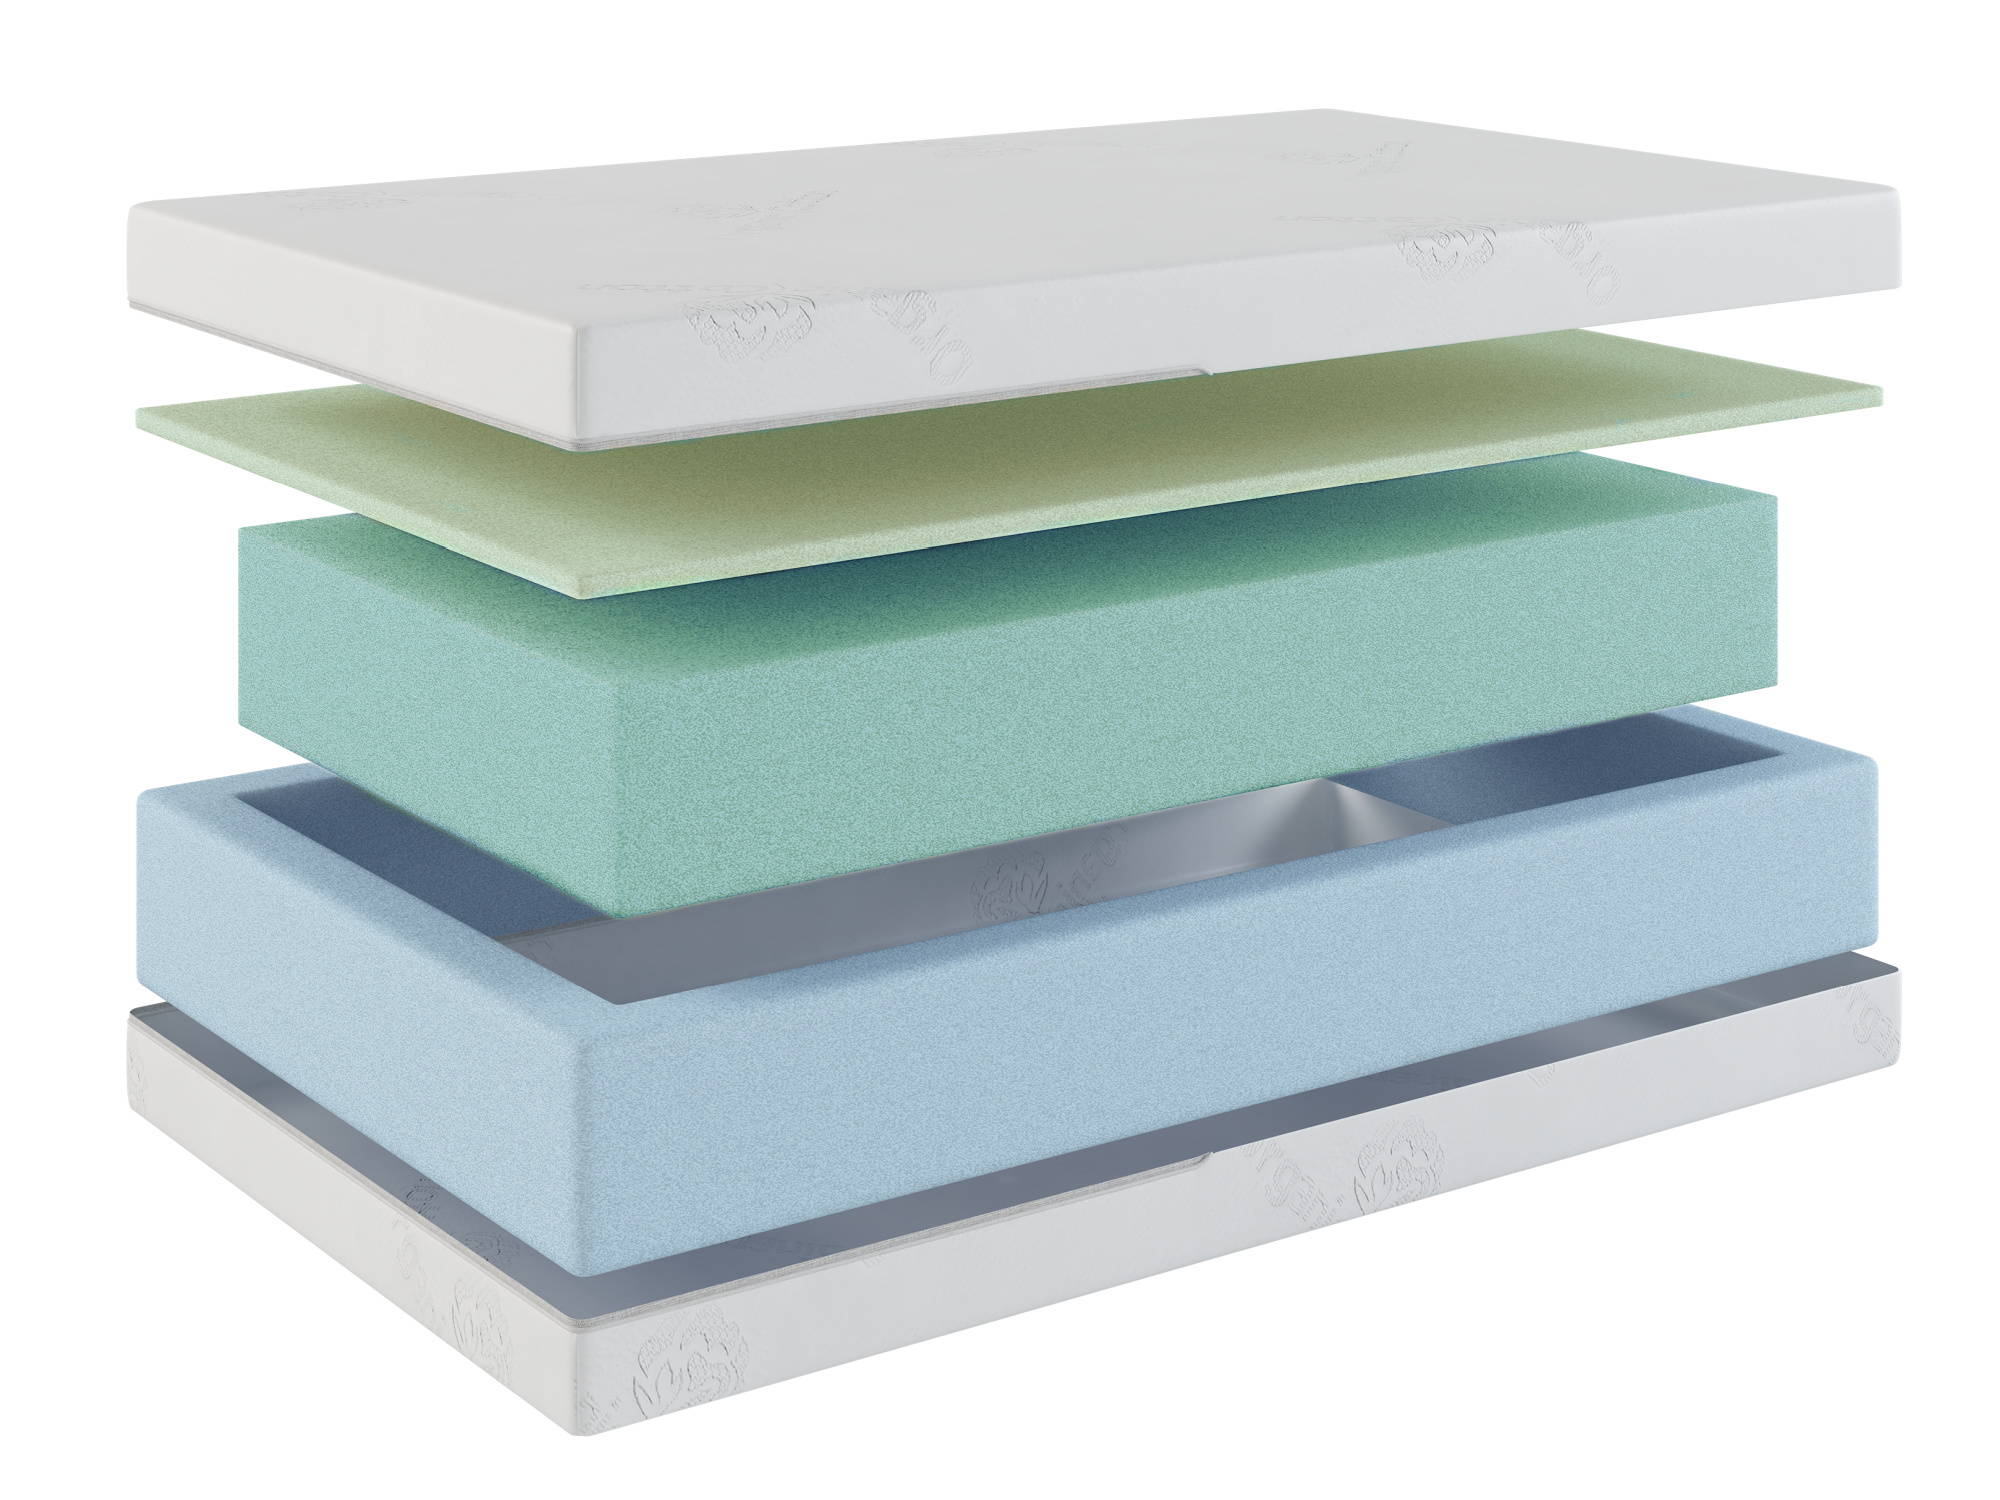 ergoBean Luxe crib mattress layers showing two breathable internal layers and reinforced edge support with a waterproof organic cotton cover.